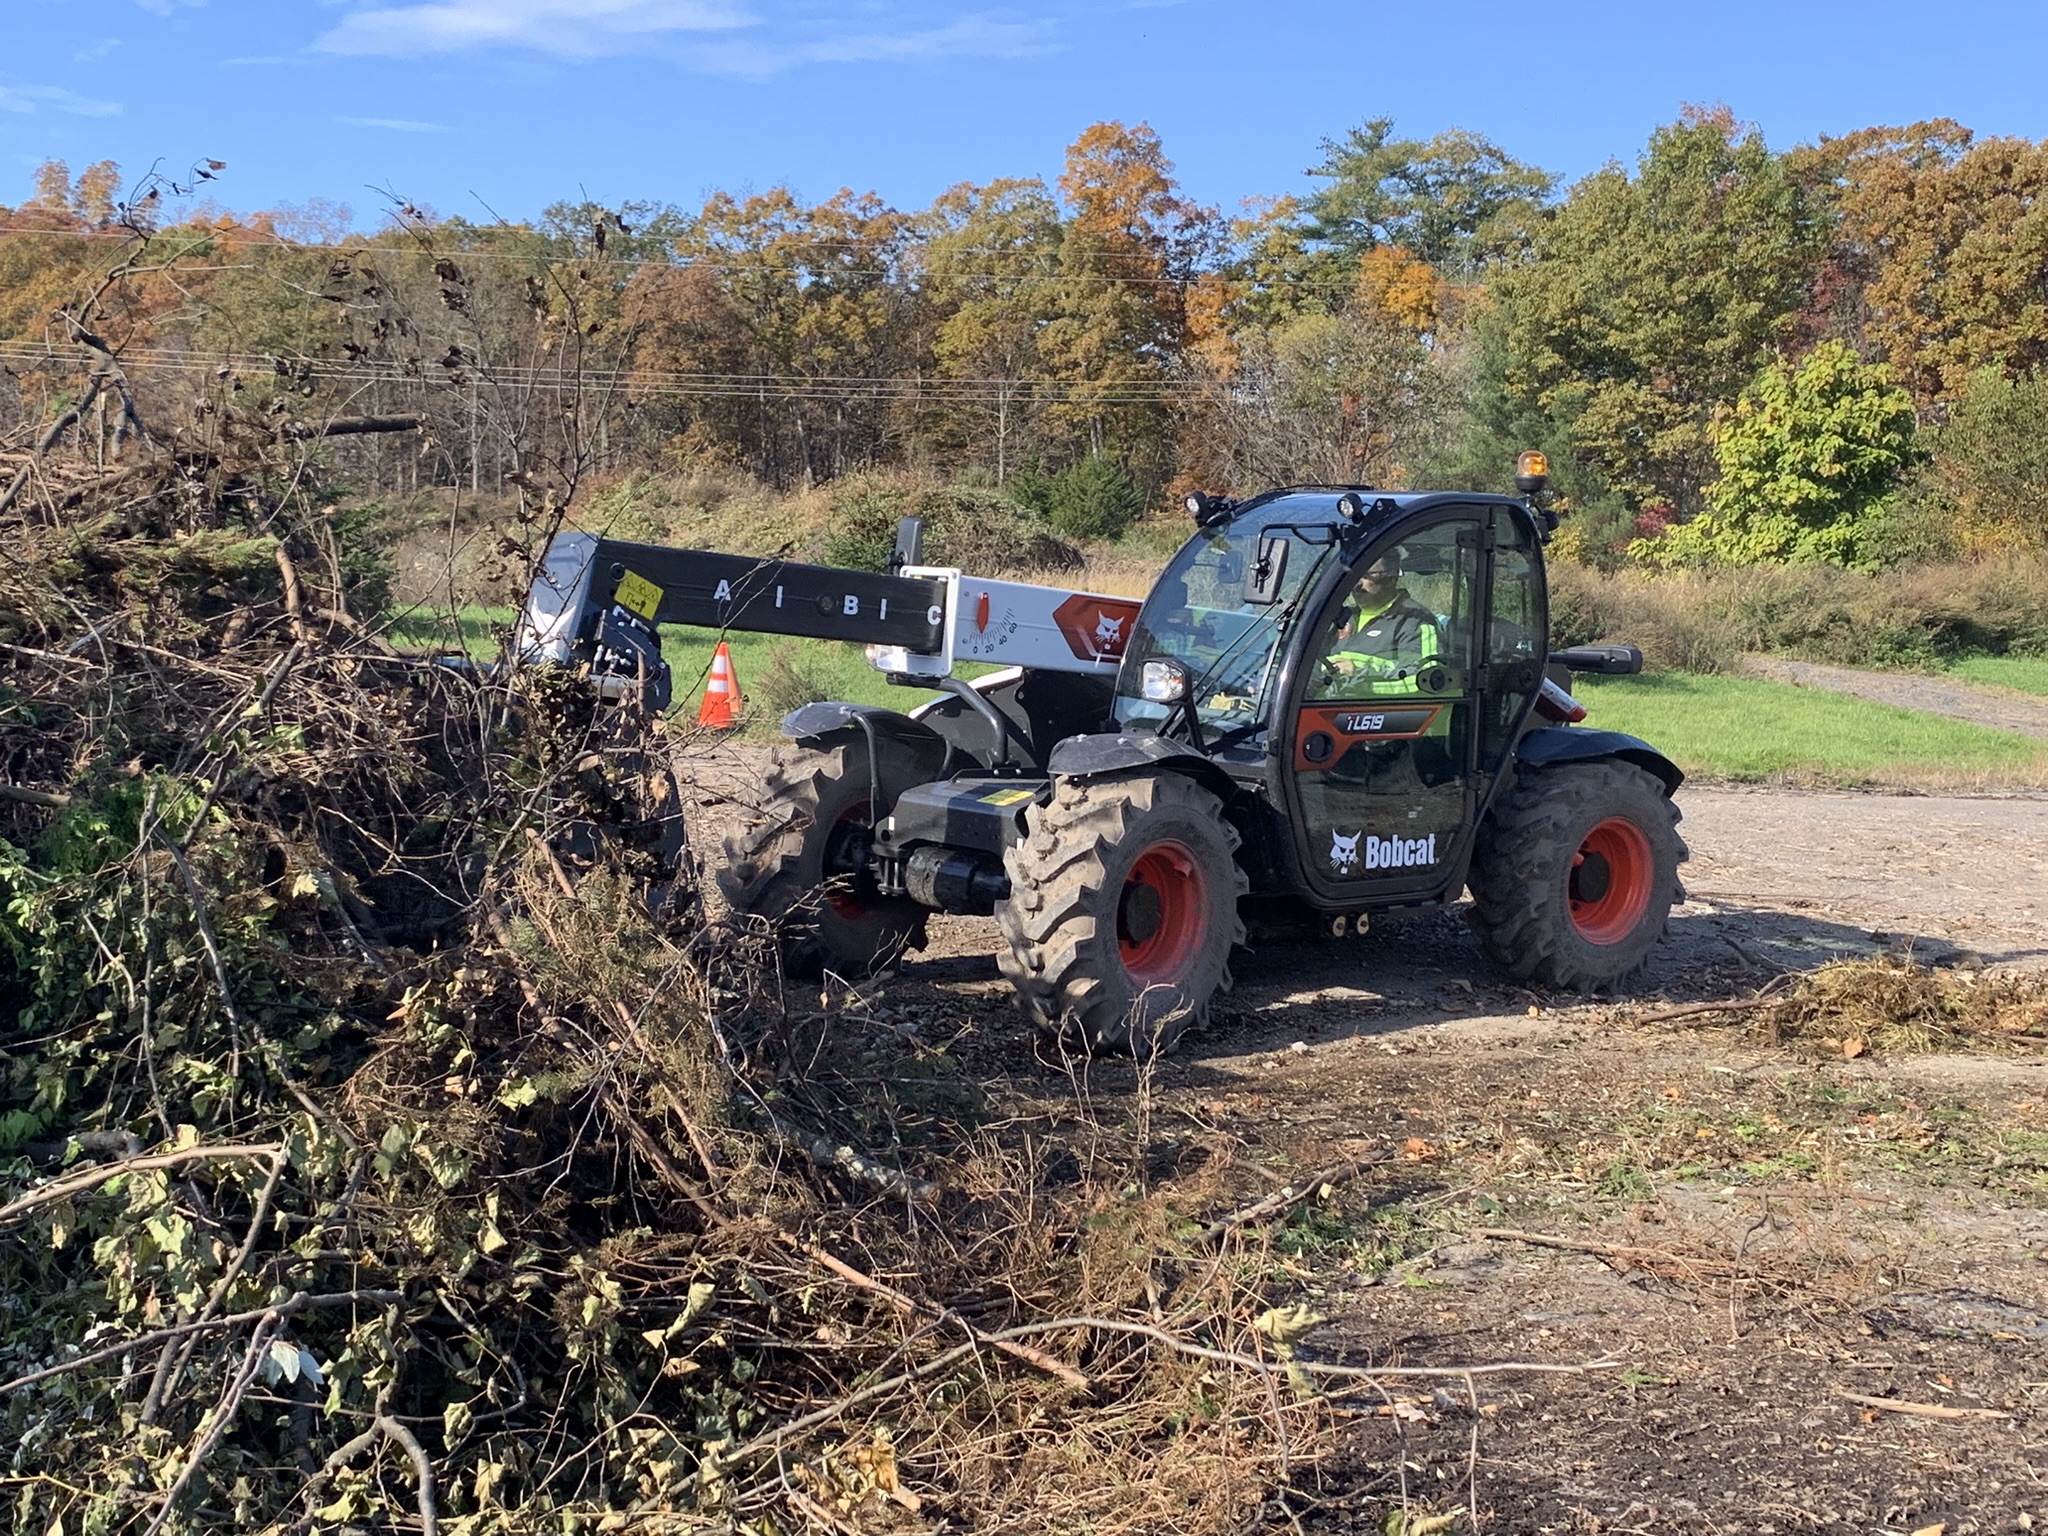 Town of New Paltz Purchases Bobcat Telehandler for Recycling & ReUse Center